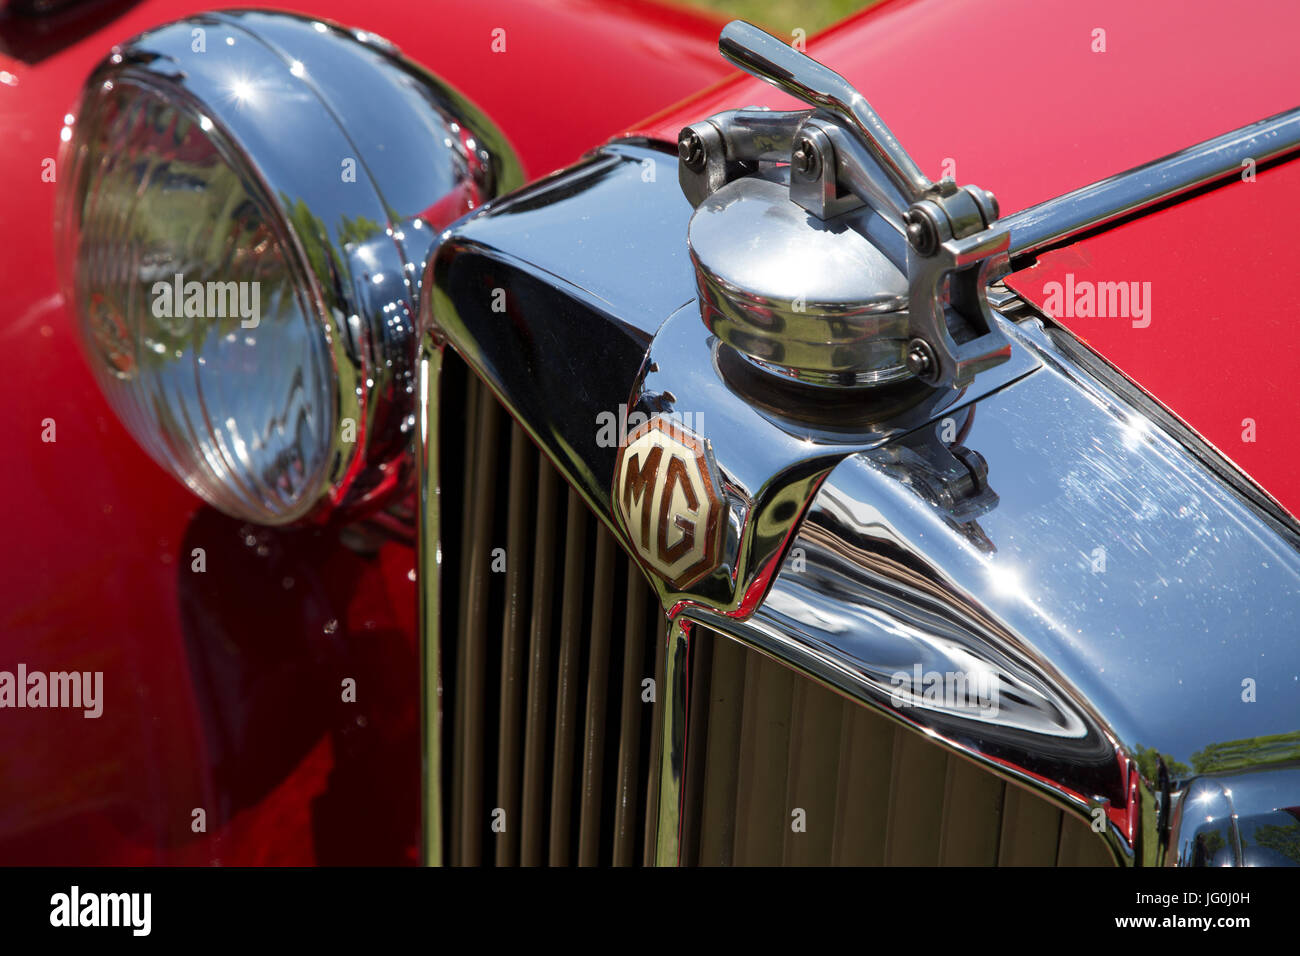 Vintage restored MG radiator and grille view Stock Photo